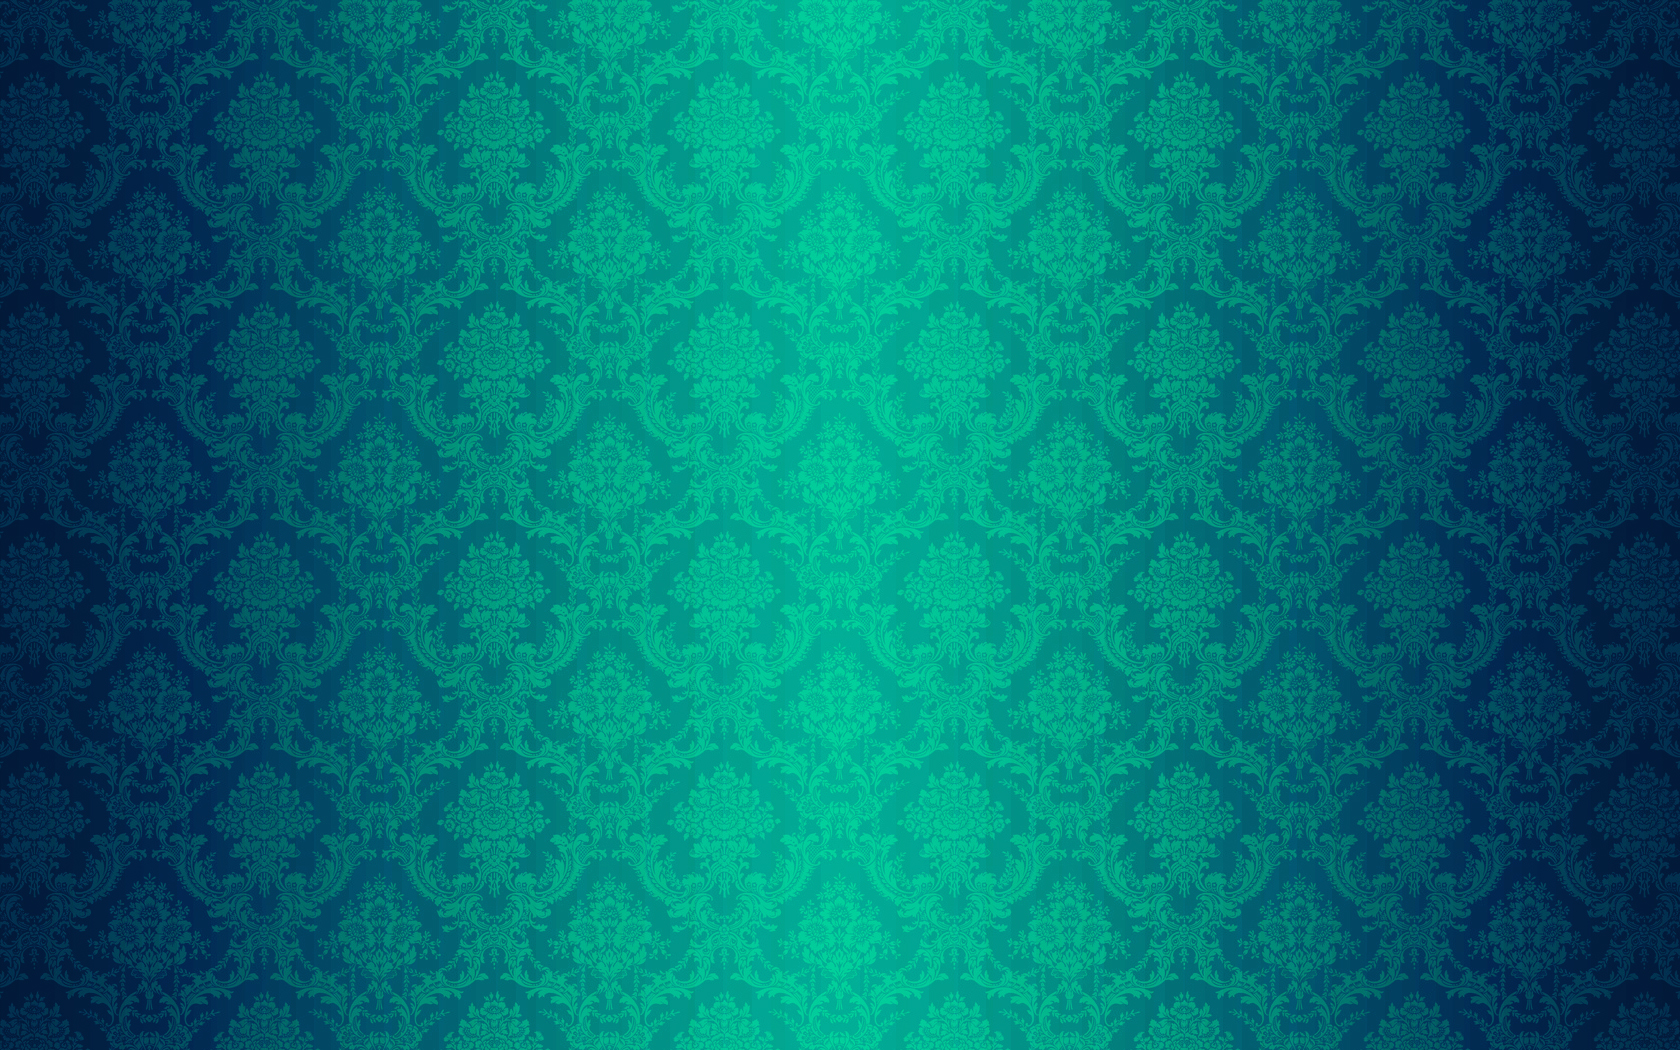 Teal Damask Background Wallpaper Ii By